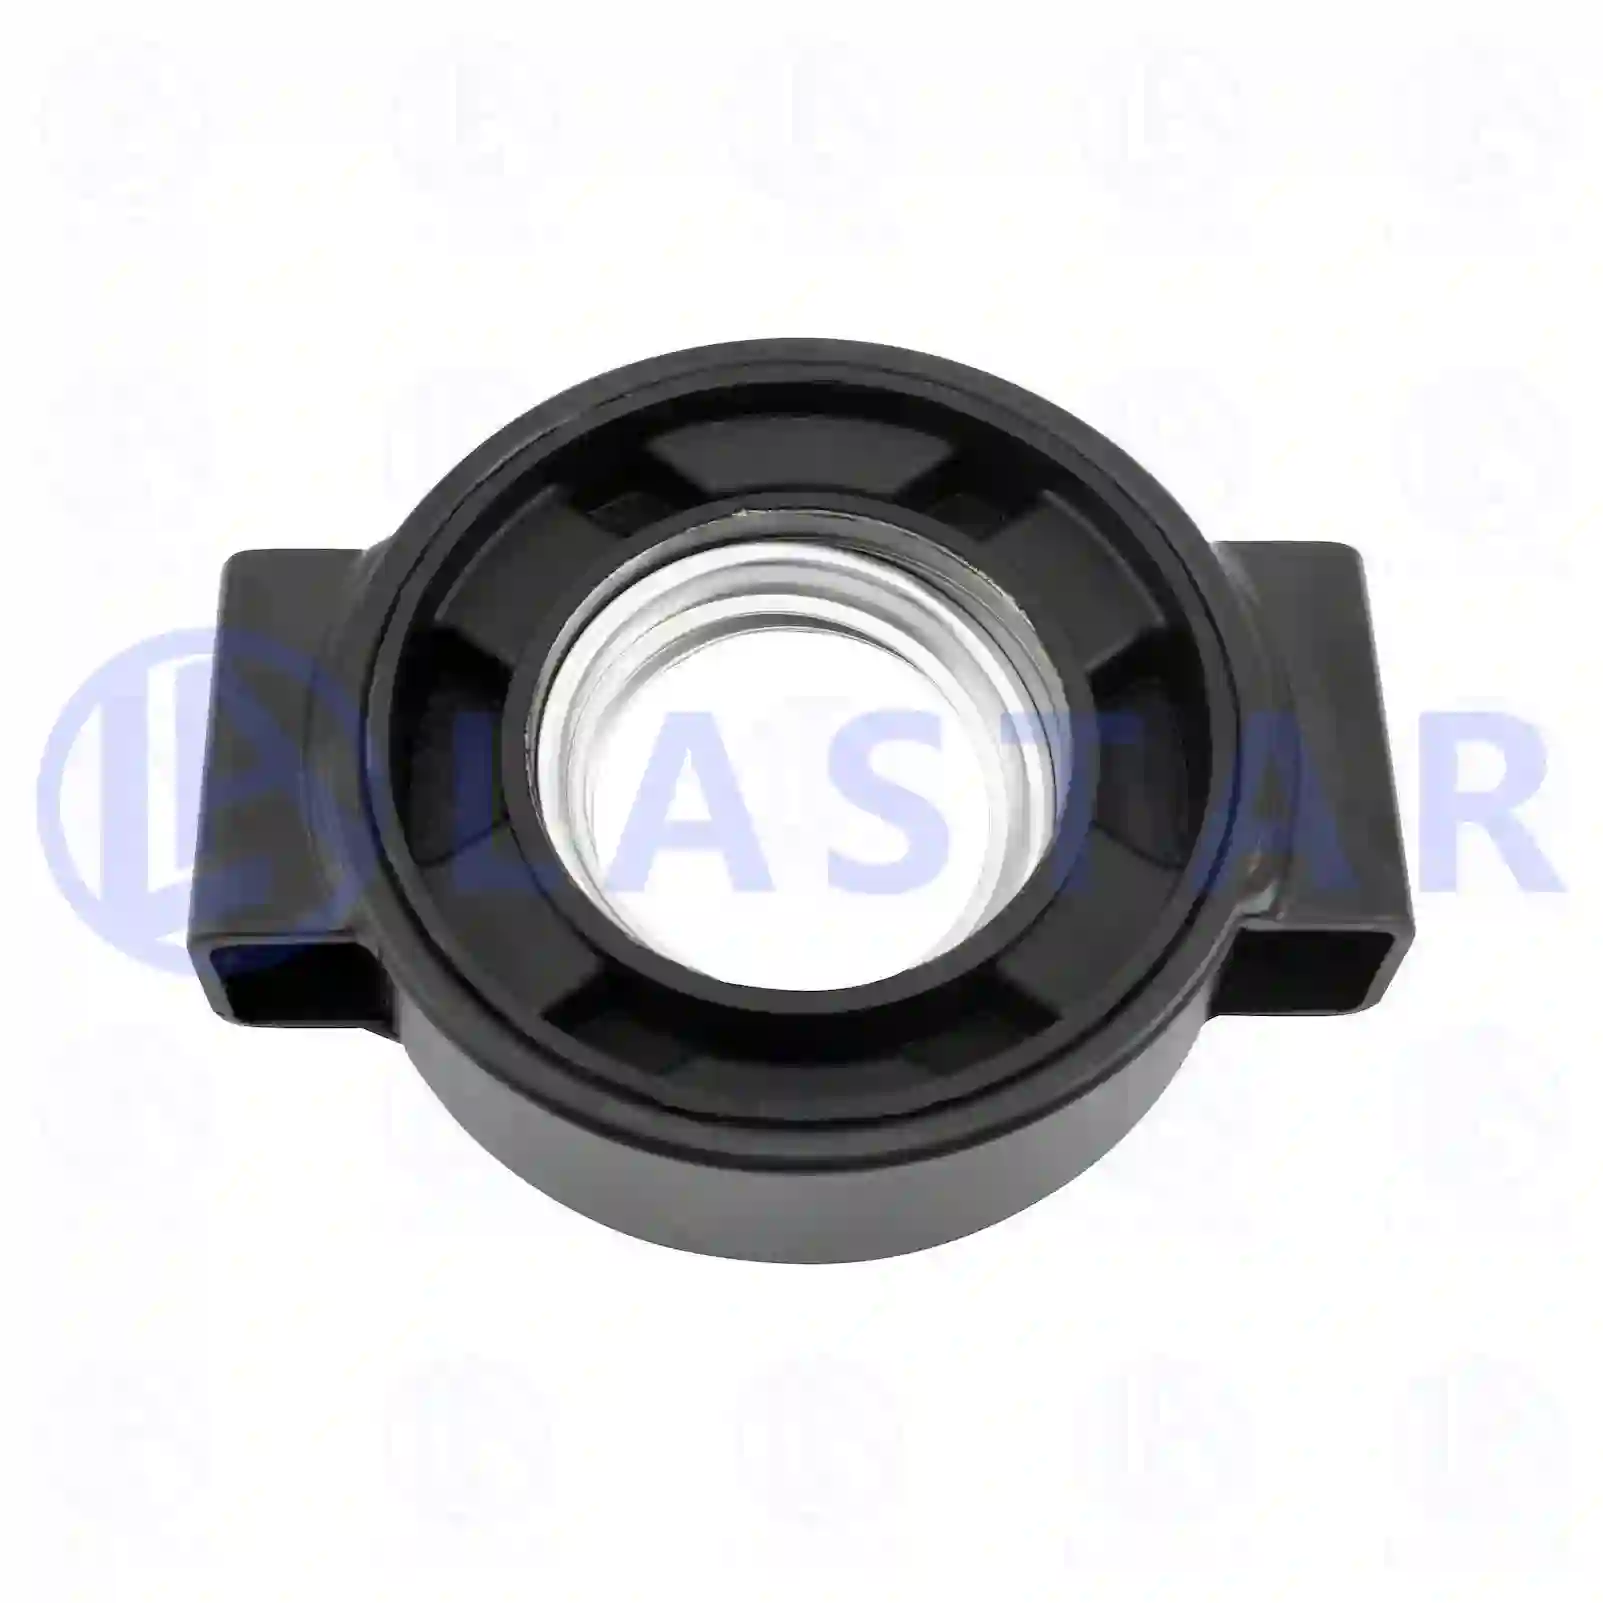  Center bearing, without ball bearing || Lastar Spare Part | Truck Spare Parts, Auotomotive Spare Parts